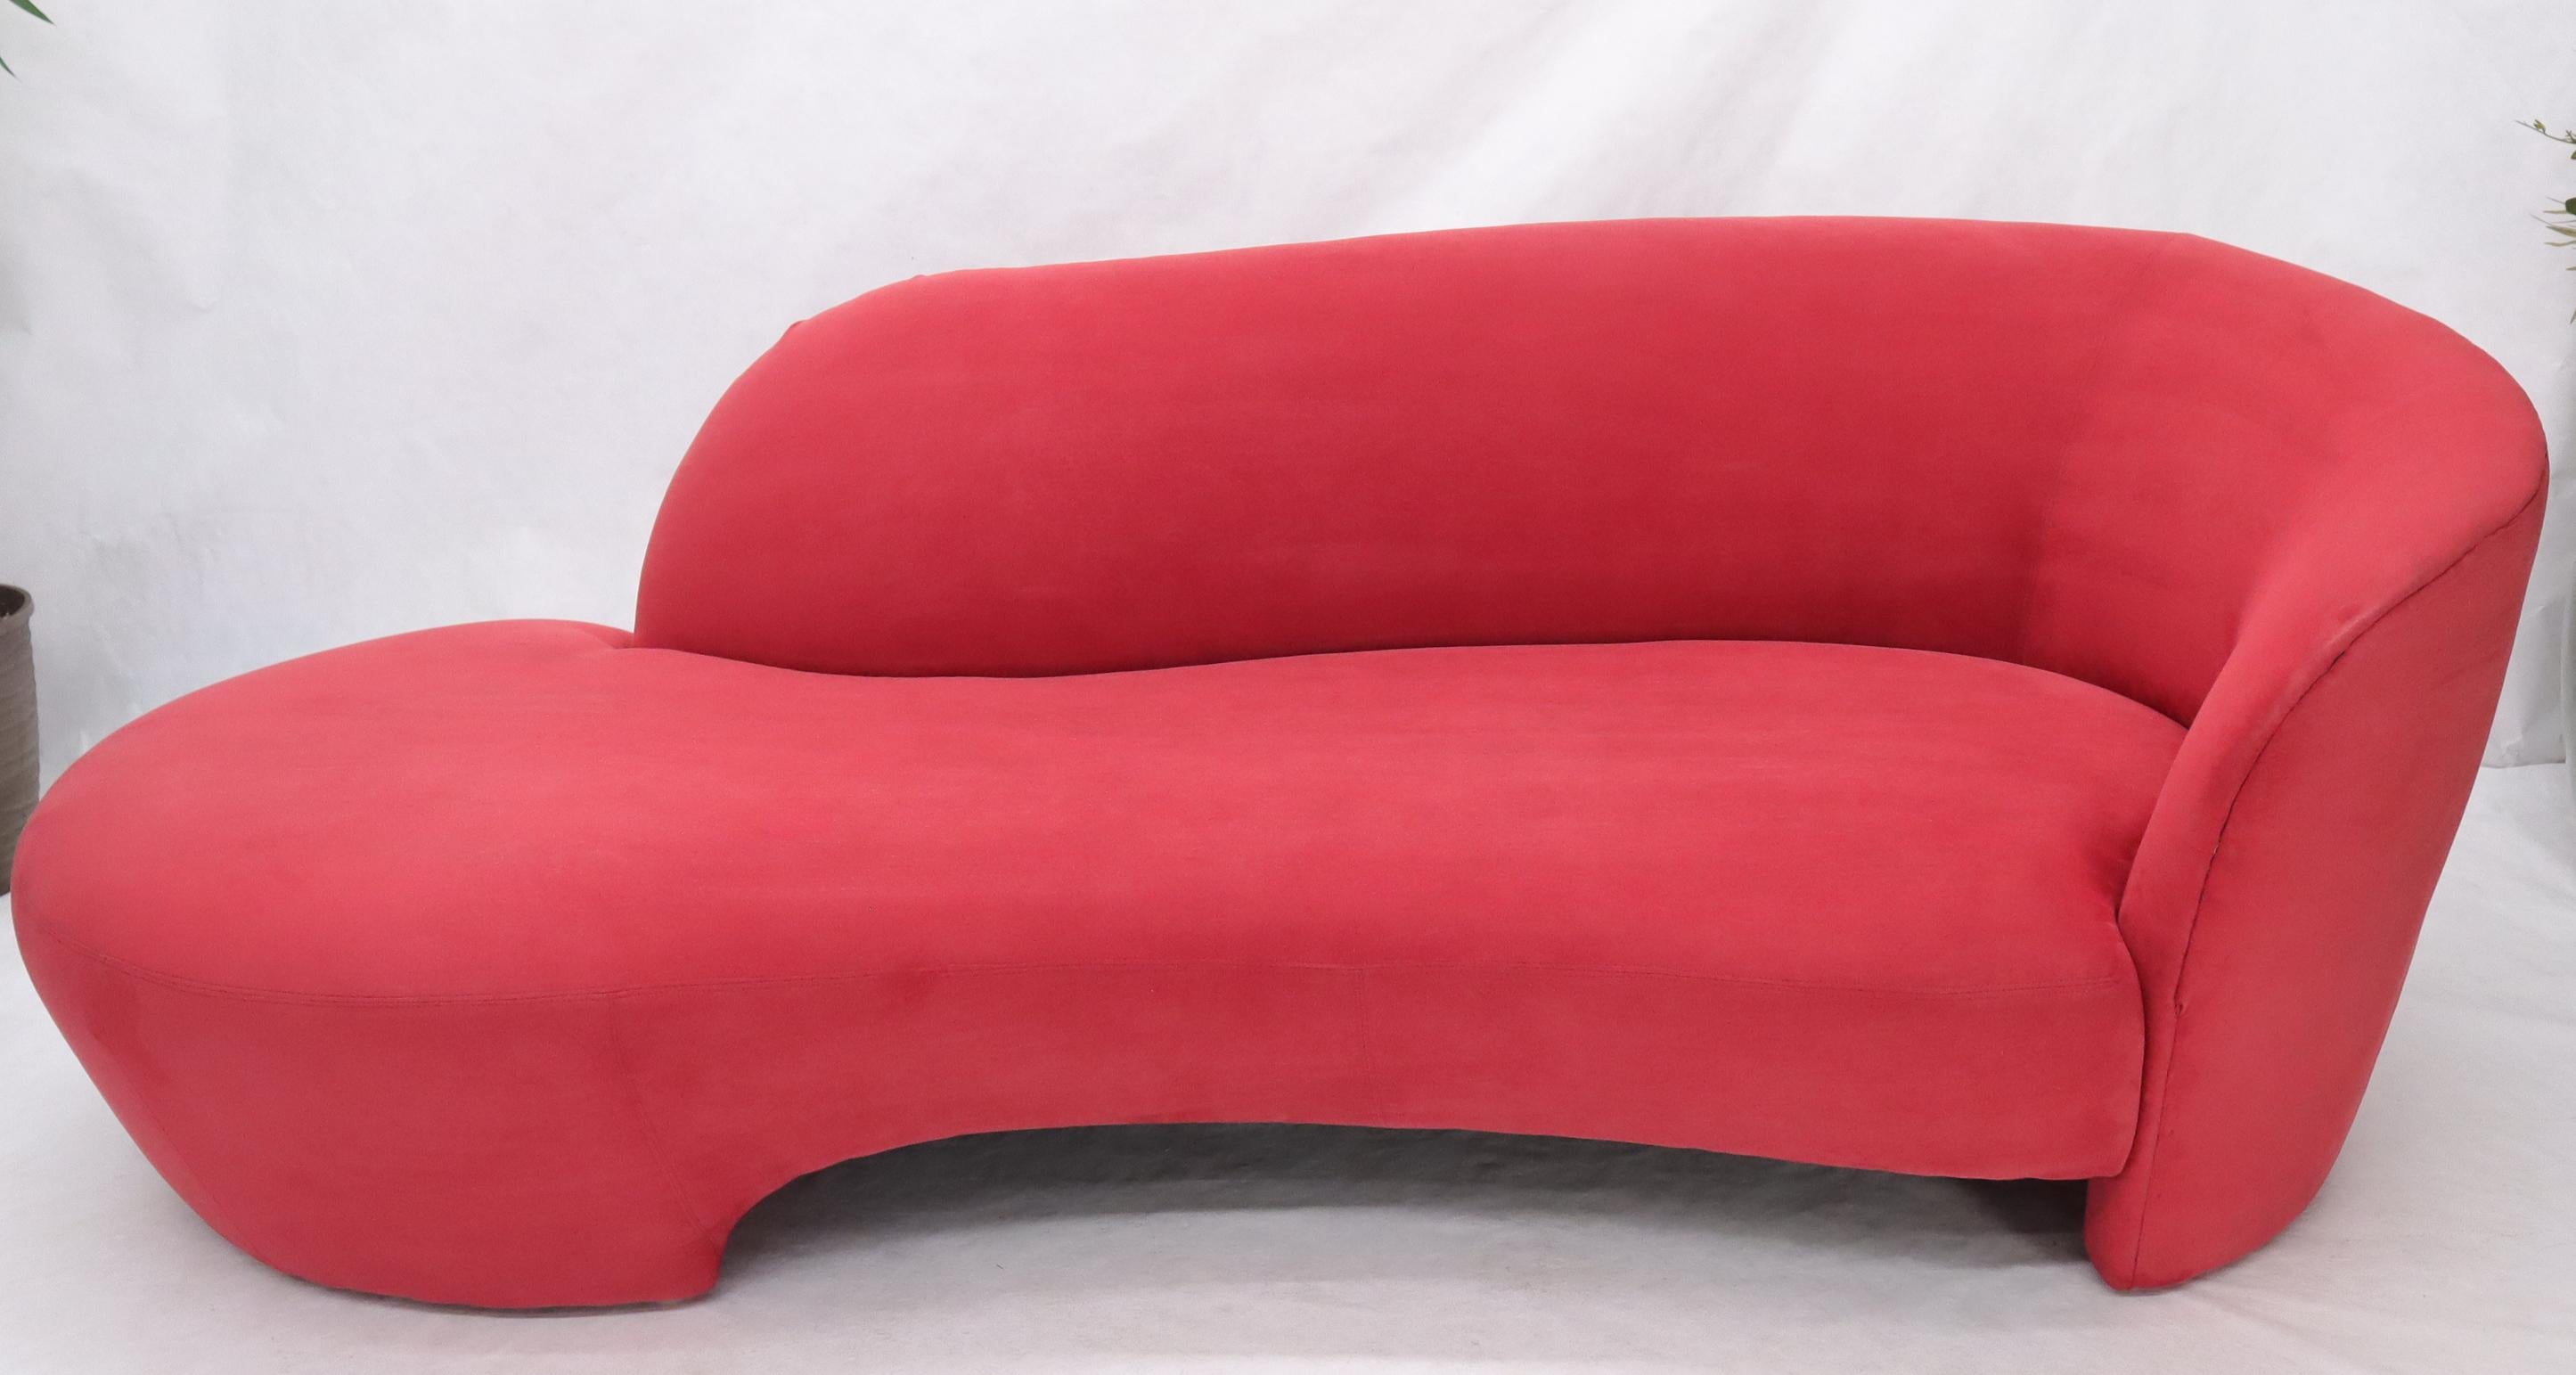 Weiman preview chaise lounge sofa in red ultra-suede.